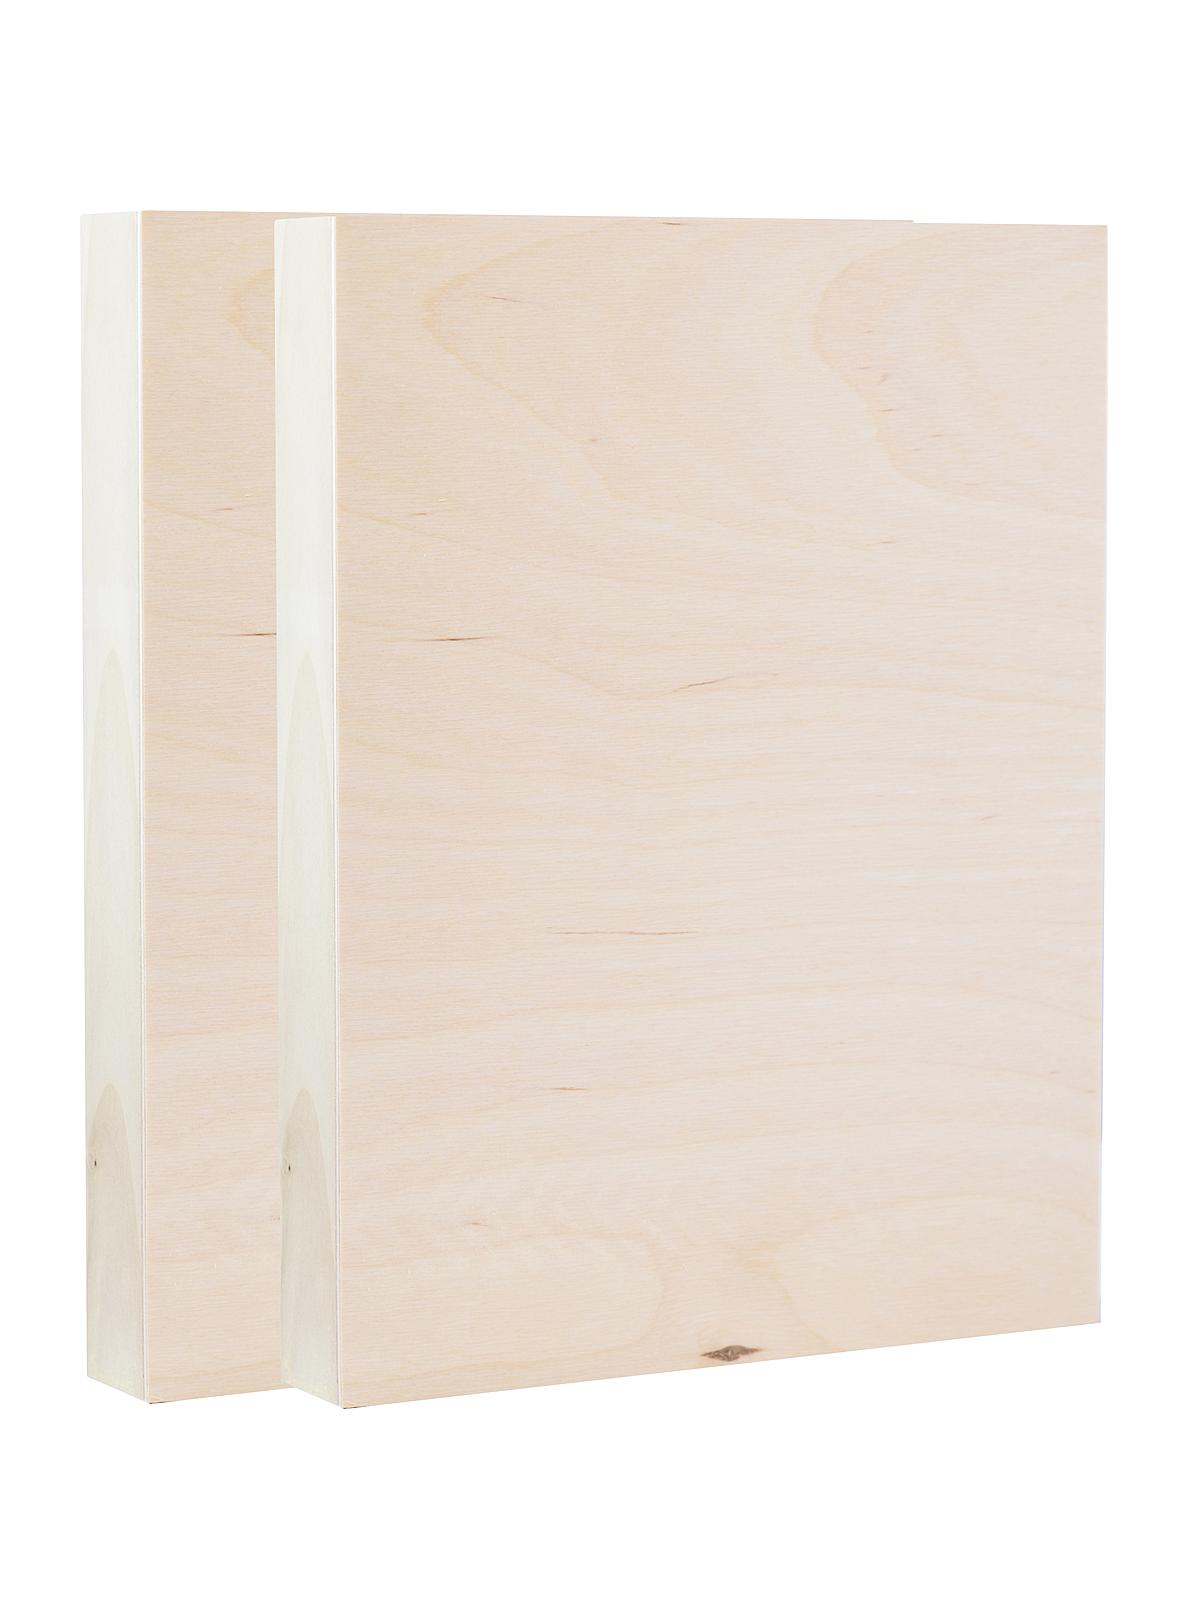 1 5 8 In. Cradled Wood Painting Panels 9 In. X 12 In.